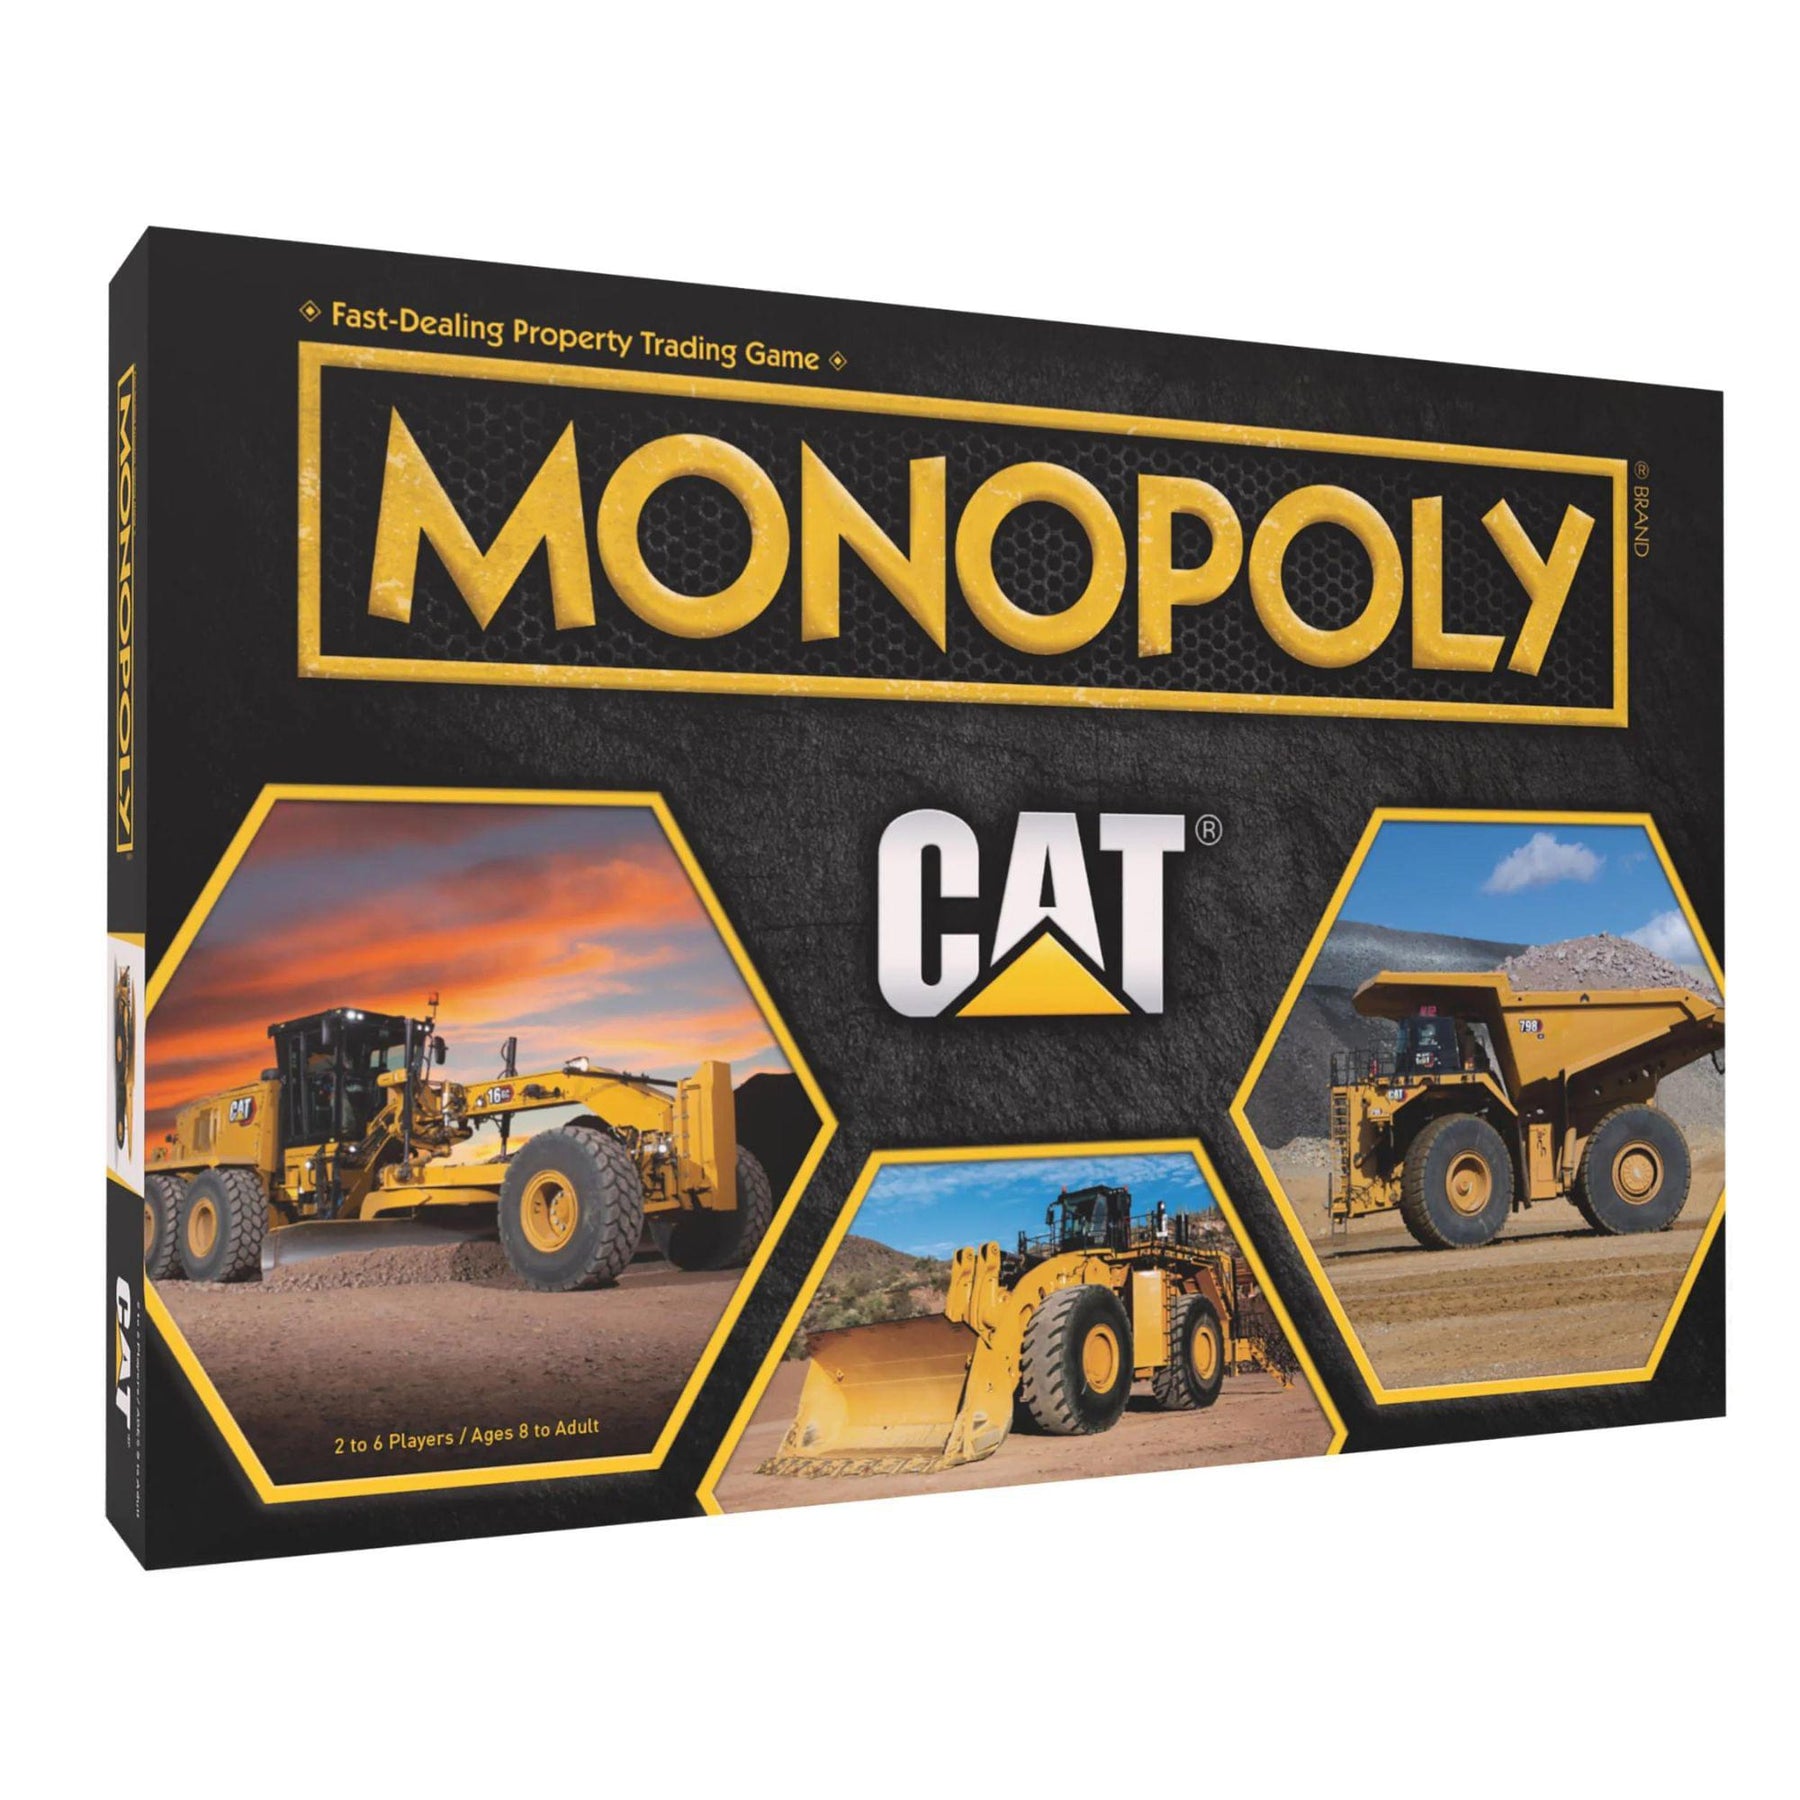 Caterpiller Monopoly Board Game